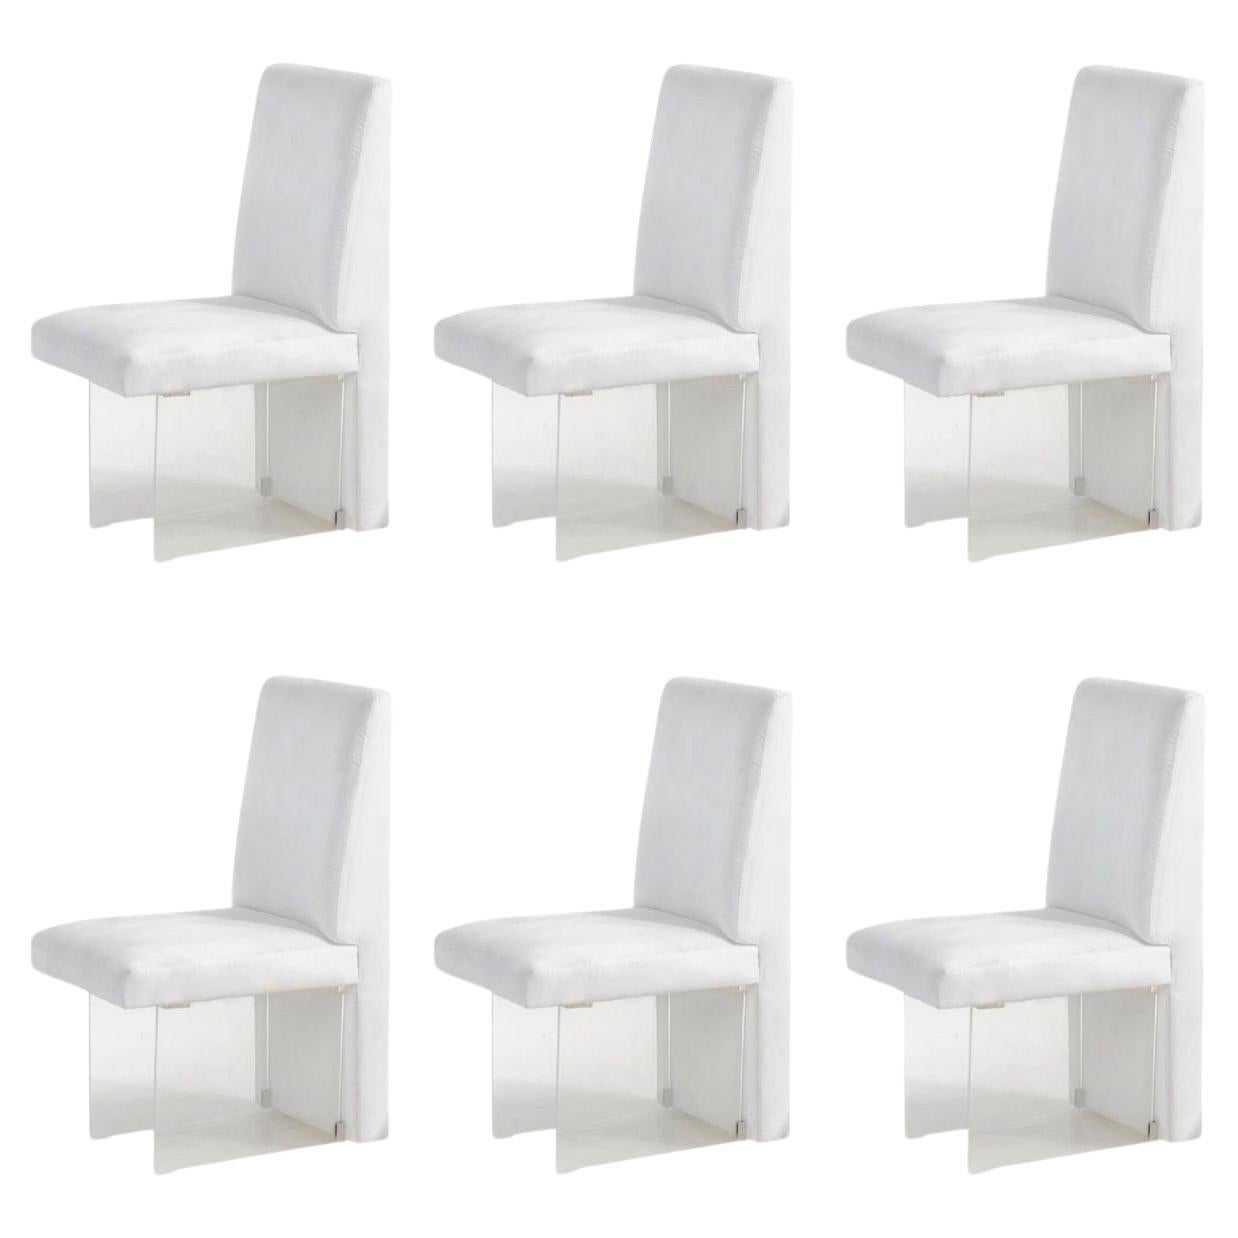 6 Vladimir Kagan "Clos" Lucite Dining Chairs, 1975 For Sale